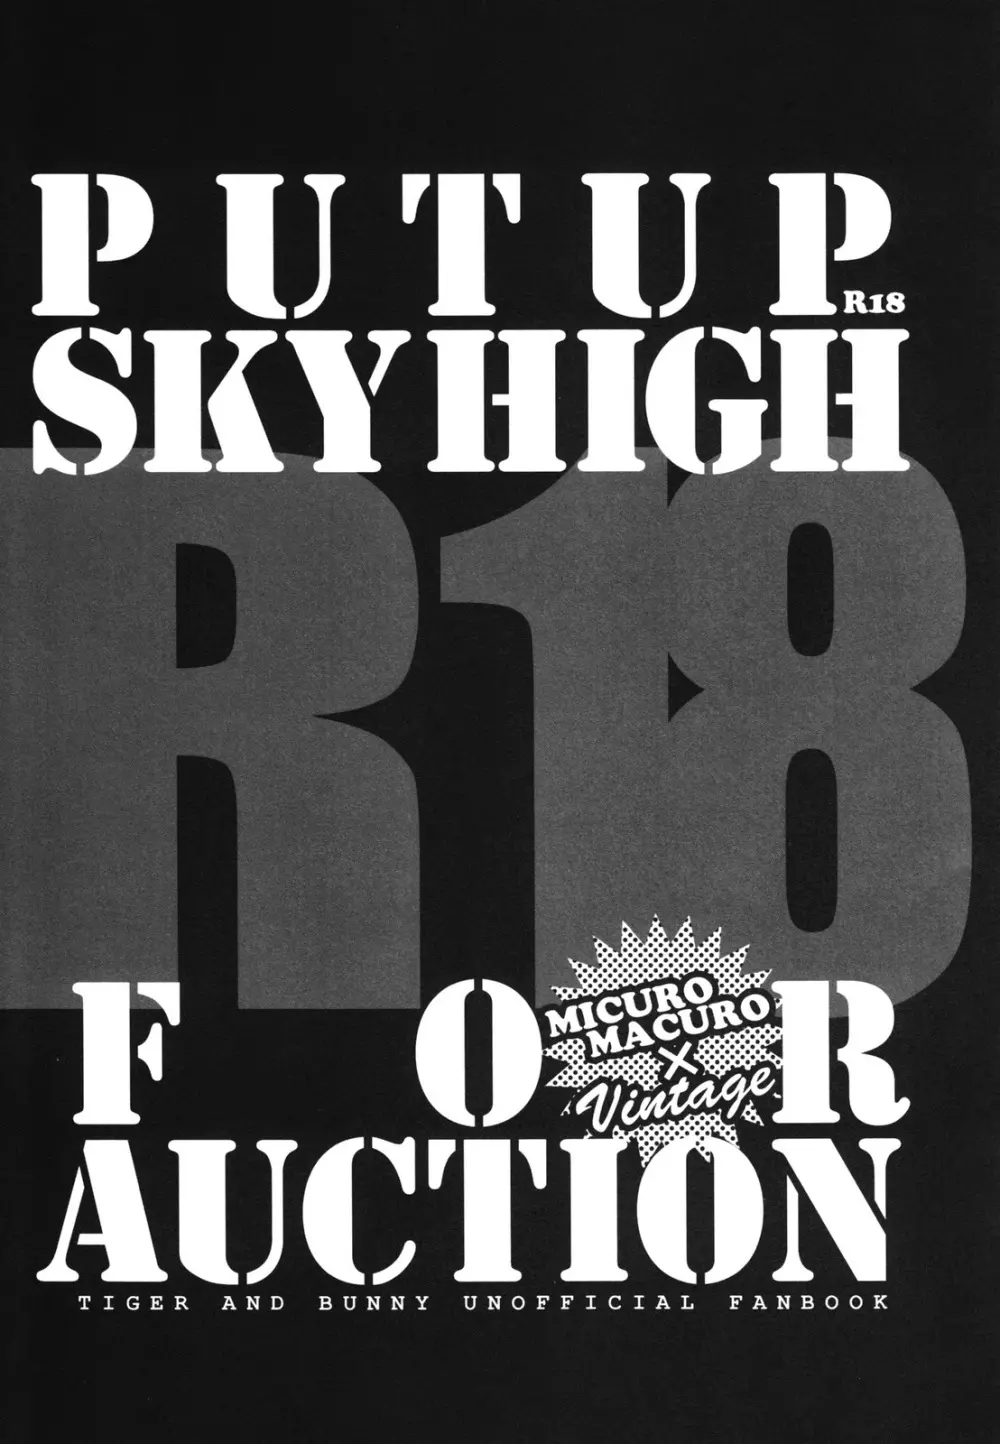 PUT UP SKYHIGH FOR AUCTION - page2